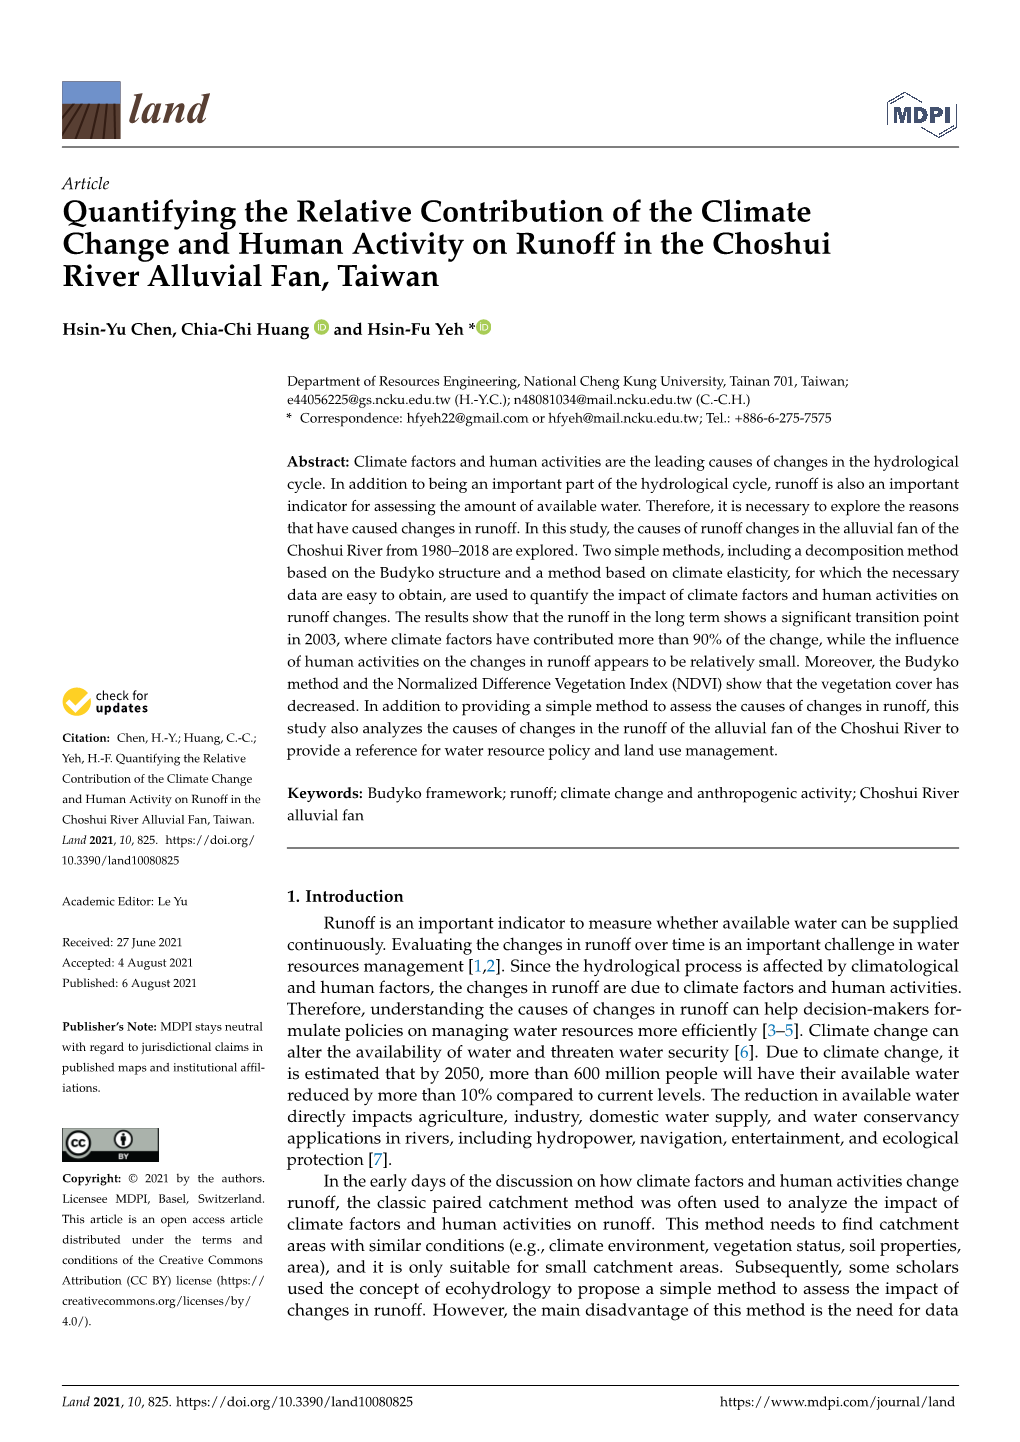 Quantifying the Relative Contribution of the Climate Change and Human Activity on Runoff in the Choshui River Alluvial Fan, Taiwan